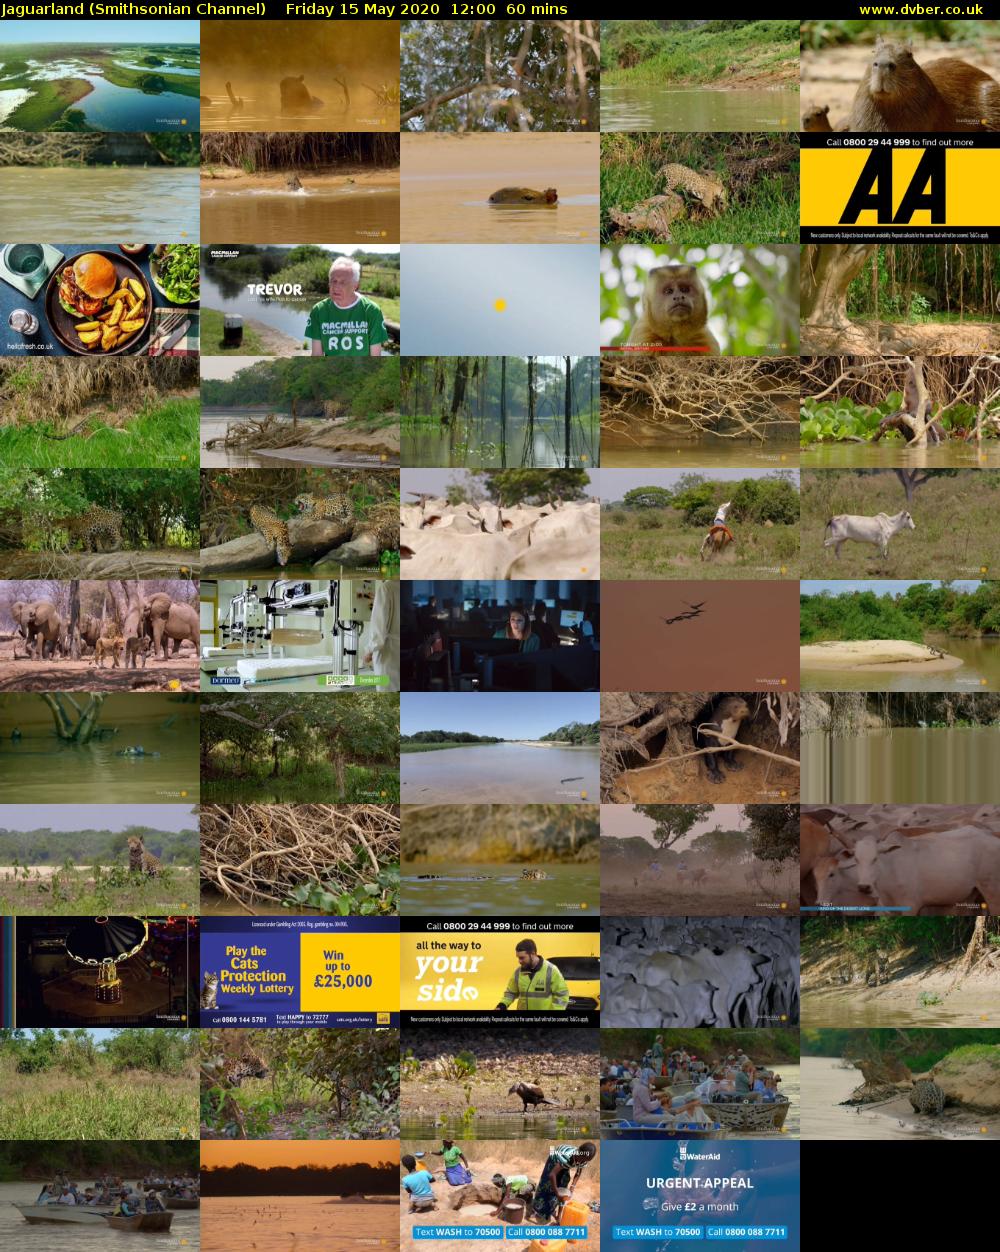 Jaguarland (Smithsonian Channel) Friday 15 May 2020 12:00 - 13:00